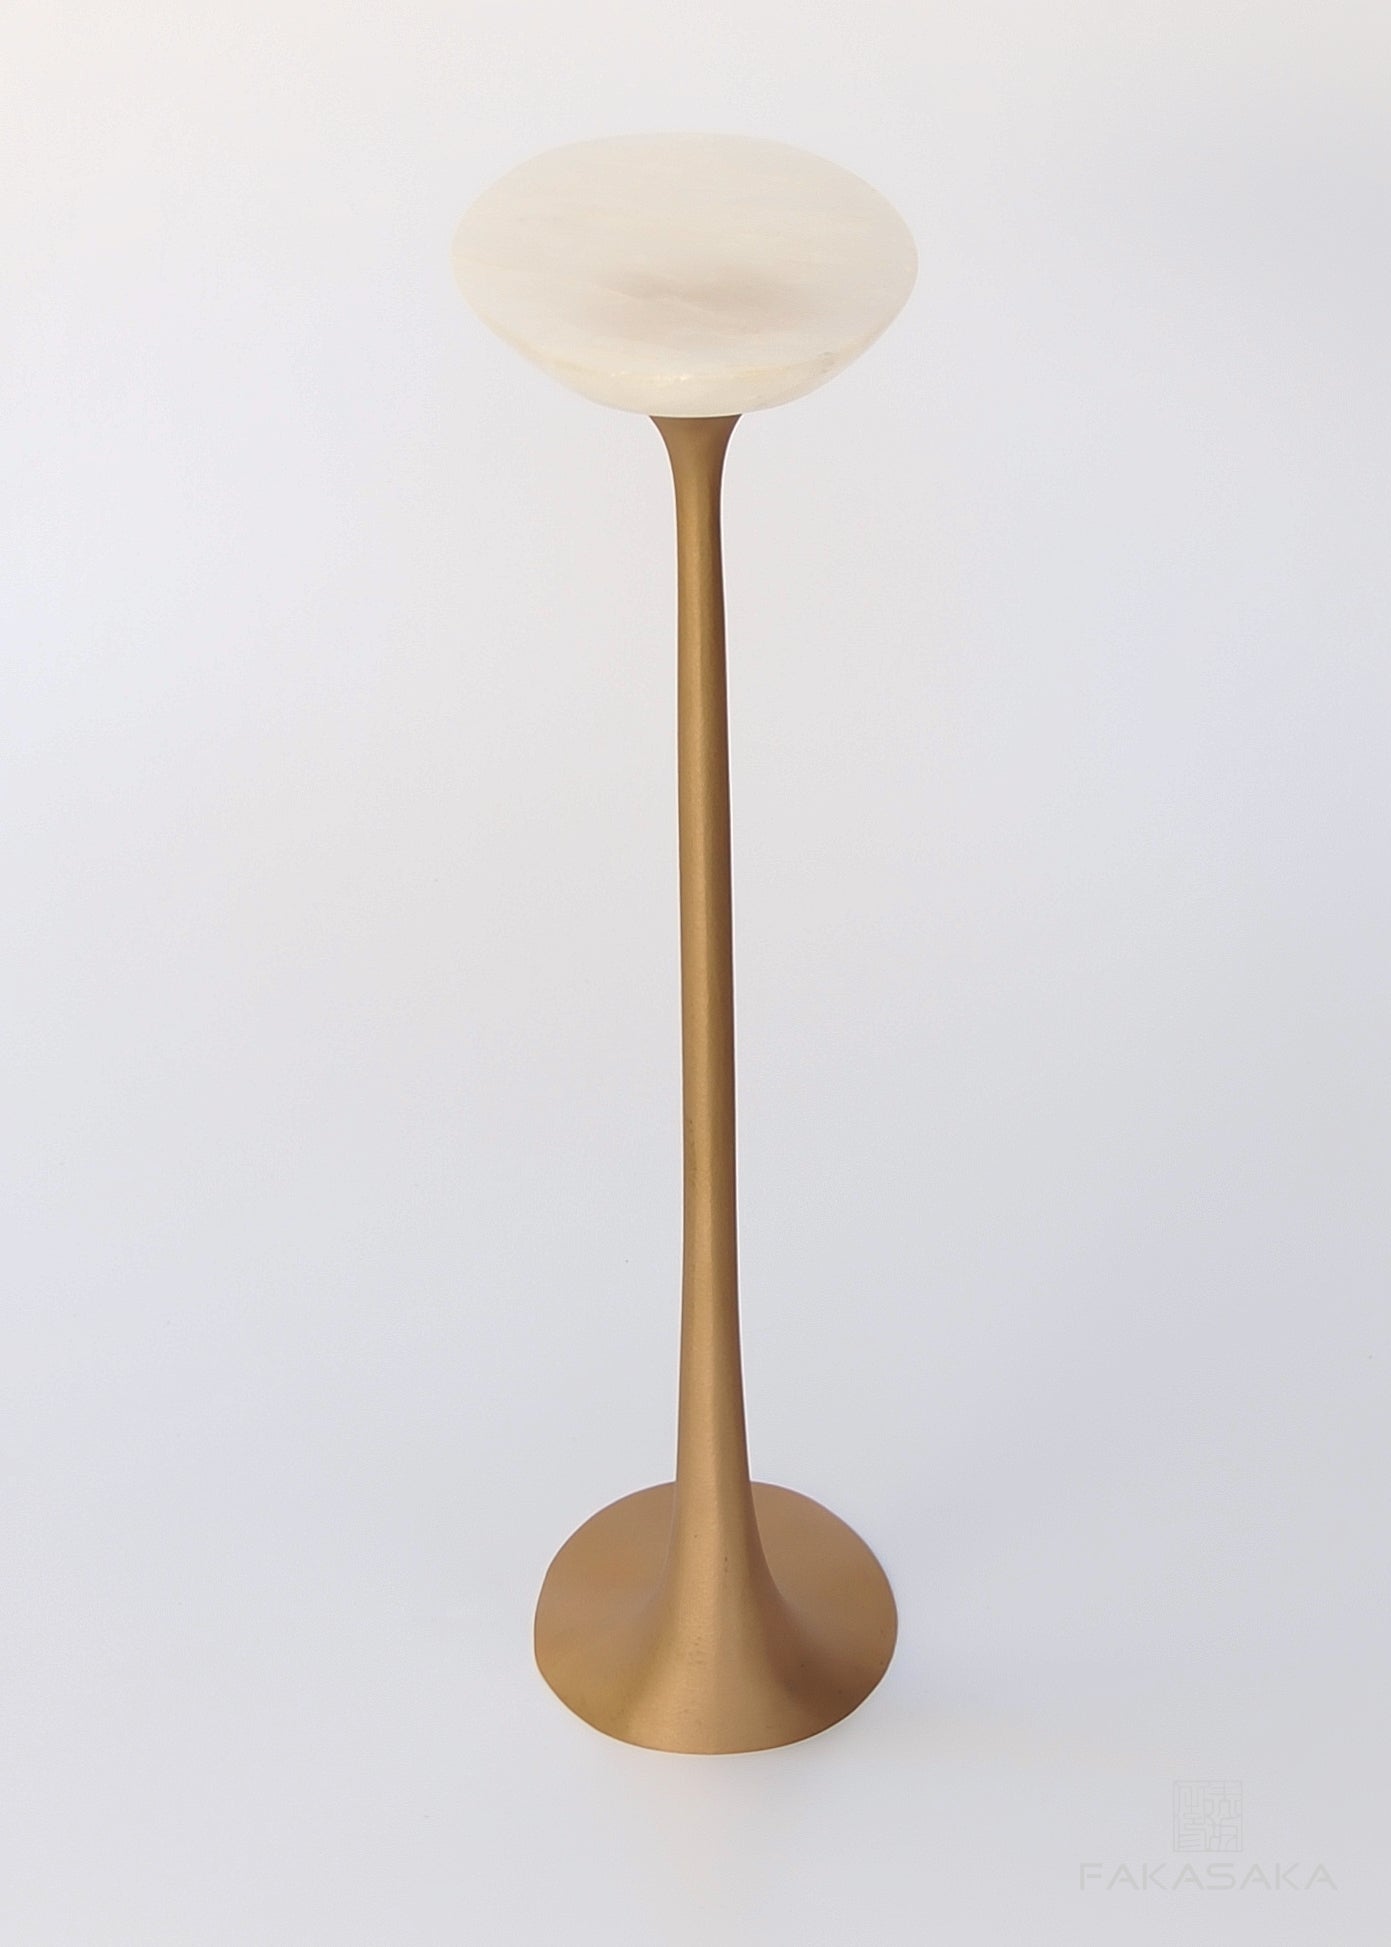 KEITH DRINK TABLE<br><br>ONYX<br>POLISHED TEXTURED BRONZE